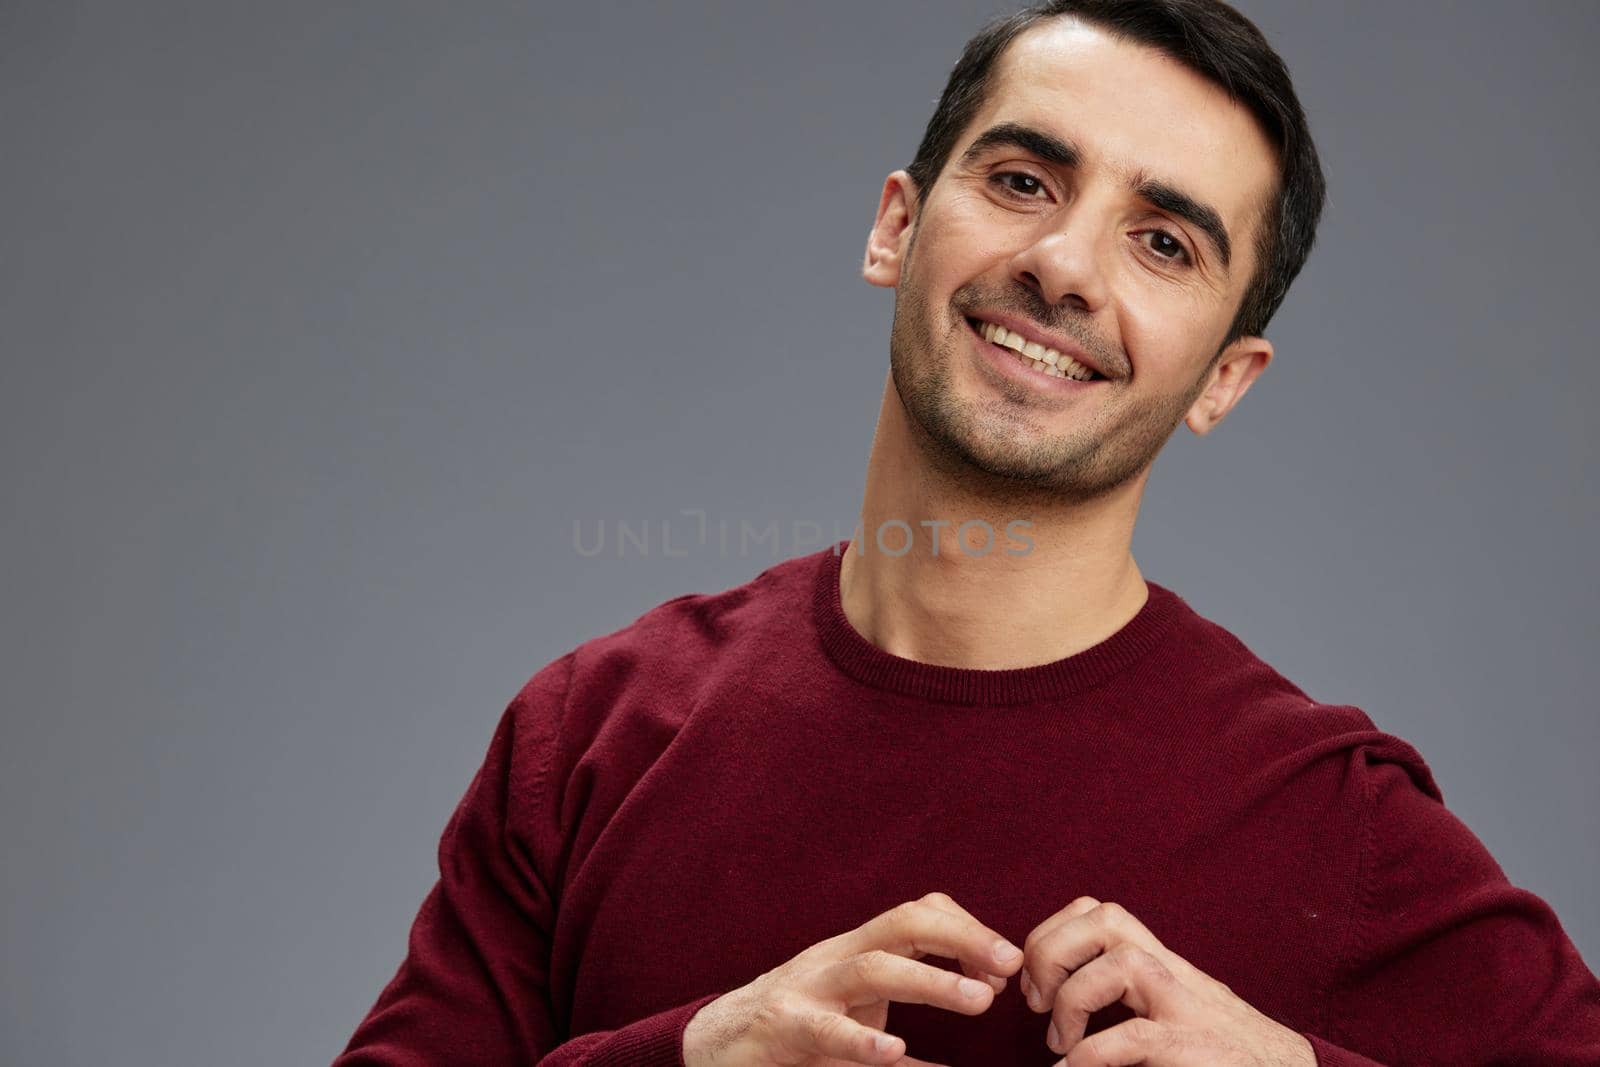 portrait man in a red sweater gesturing with hands posing Gray background. High quality photo